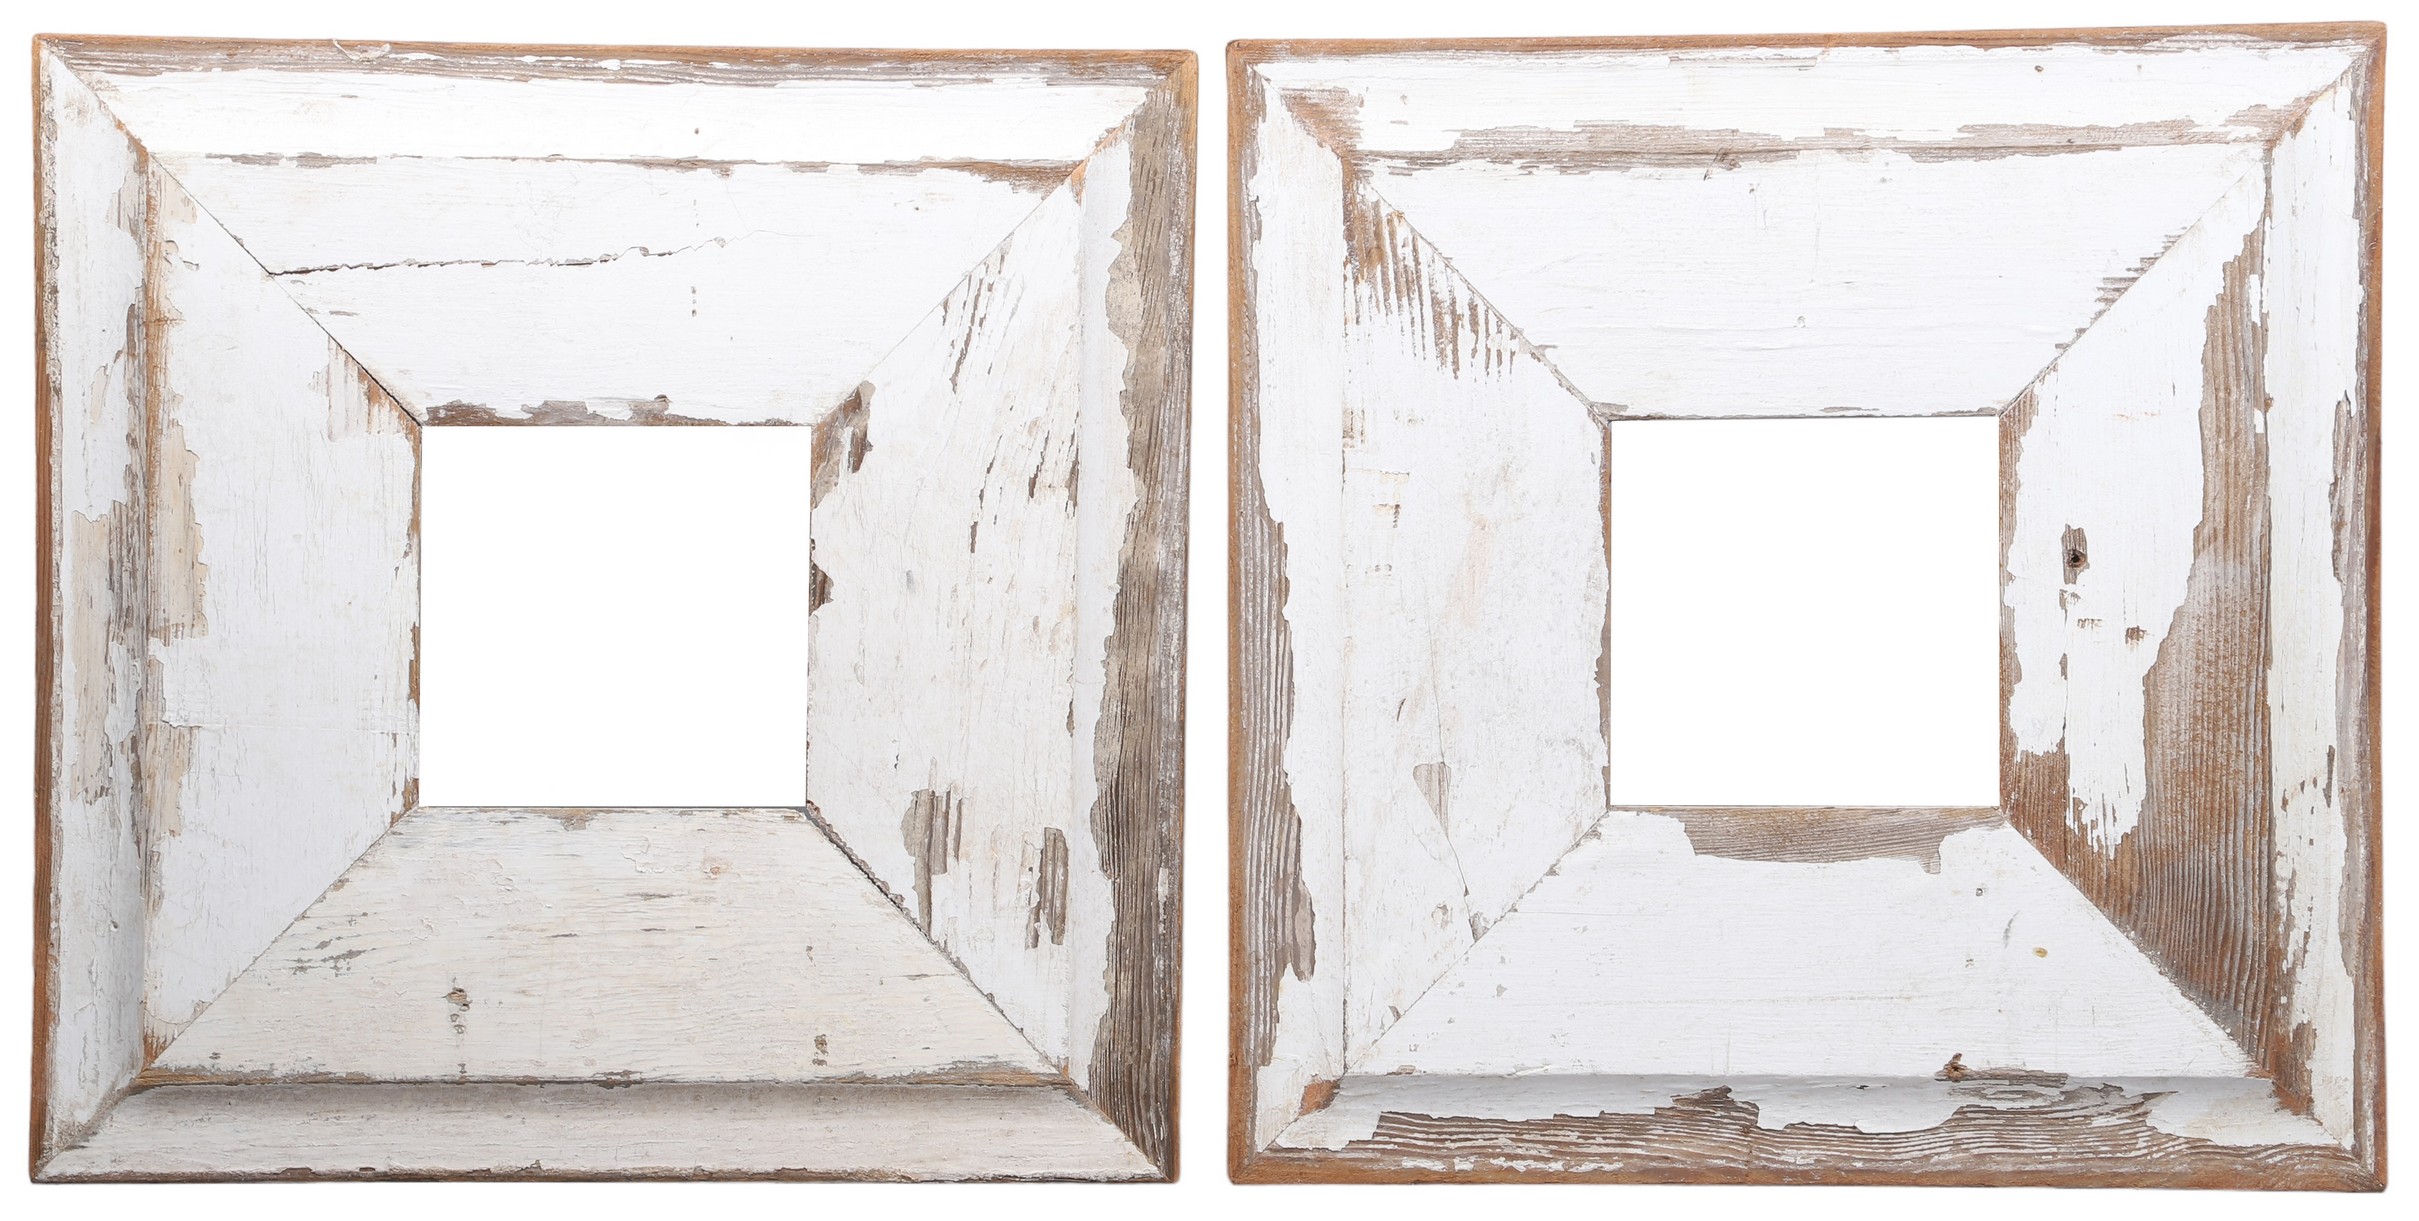 A pair of rustic wooden white picture